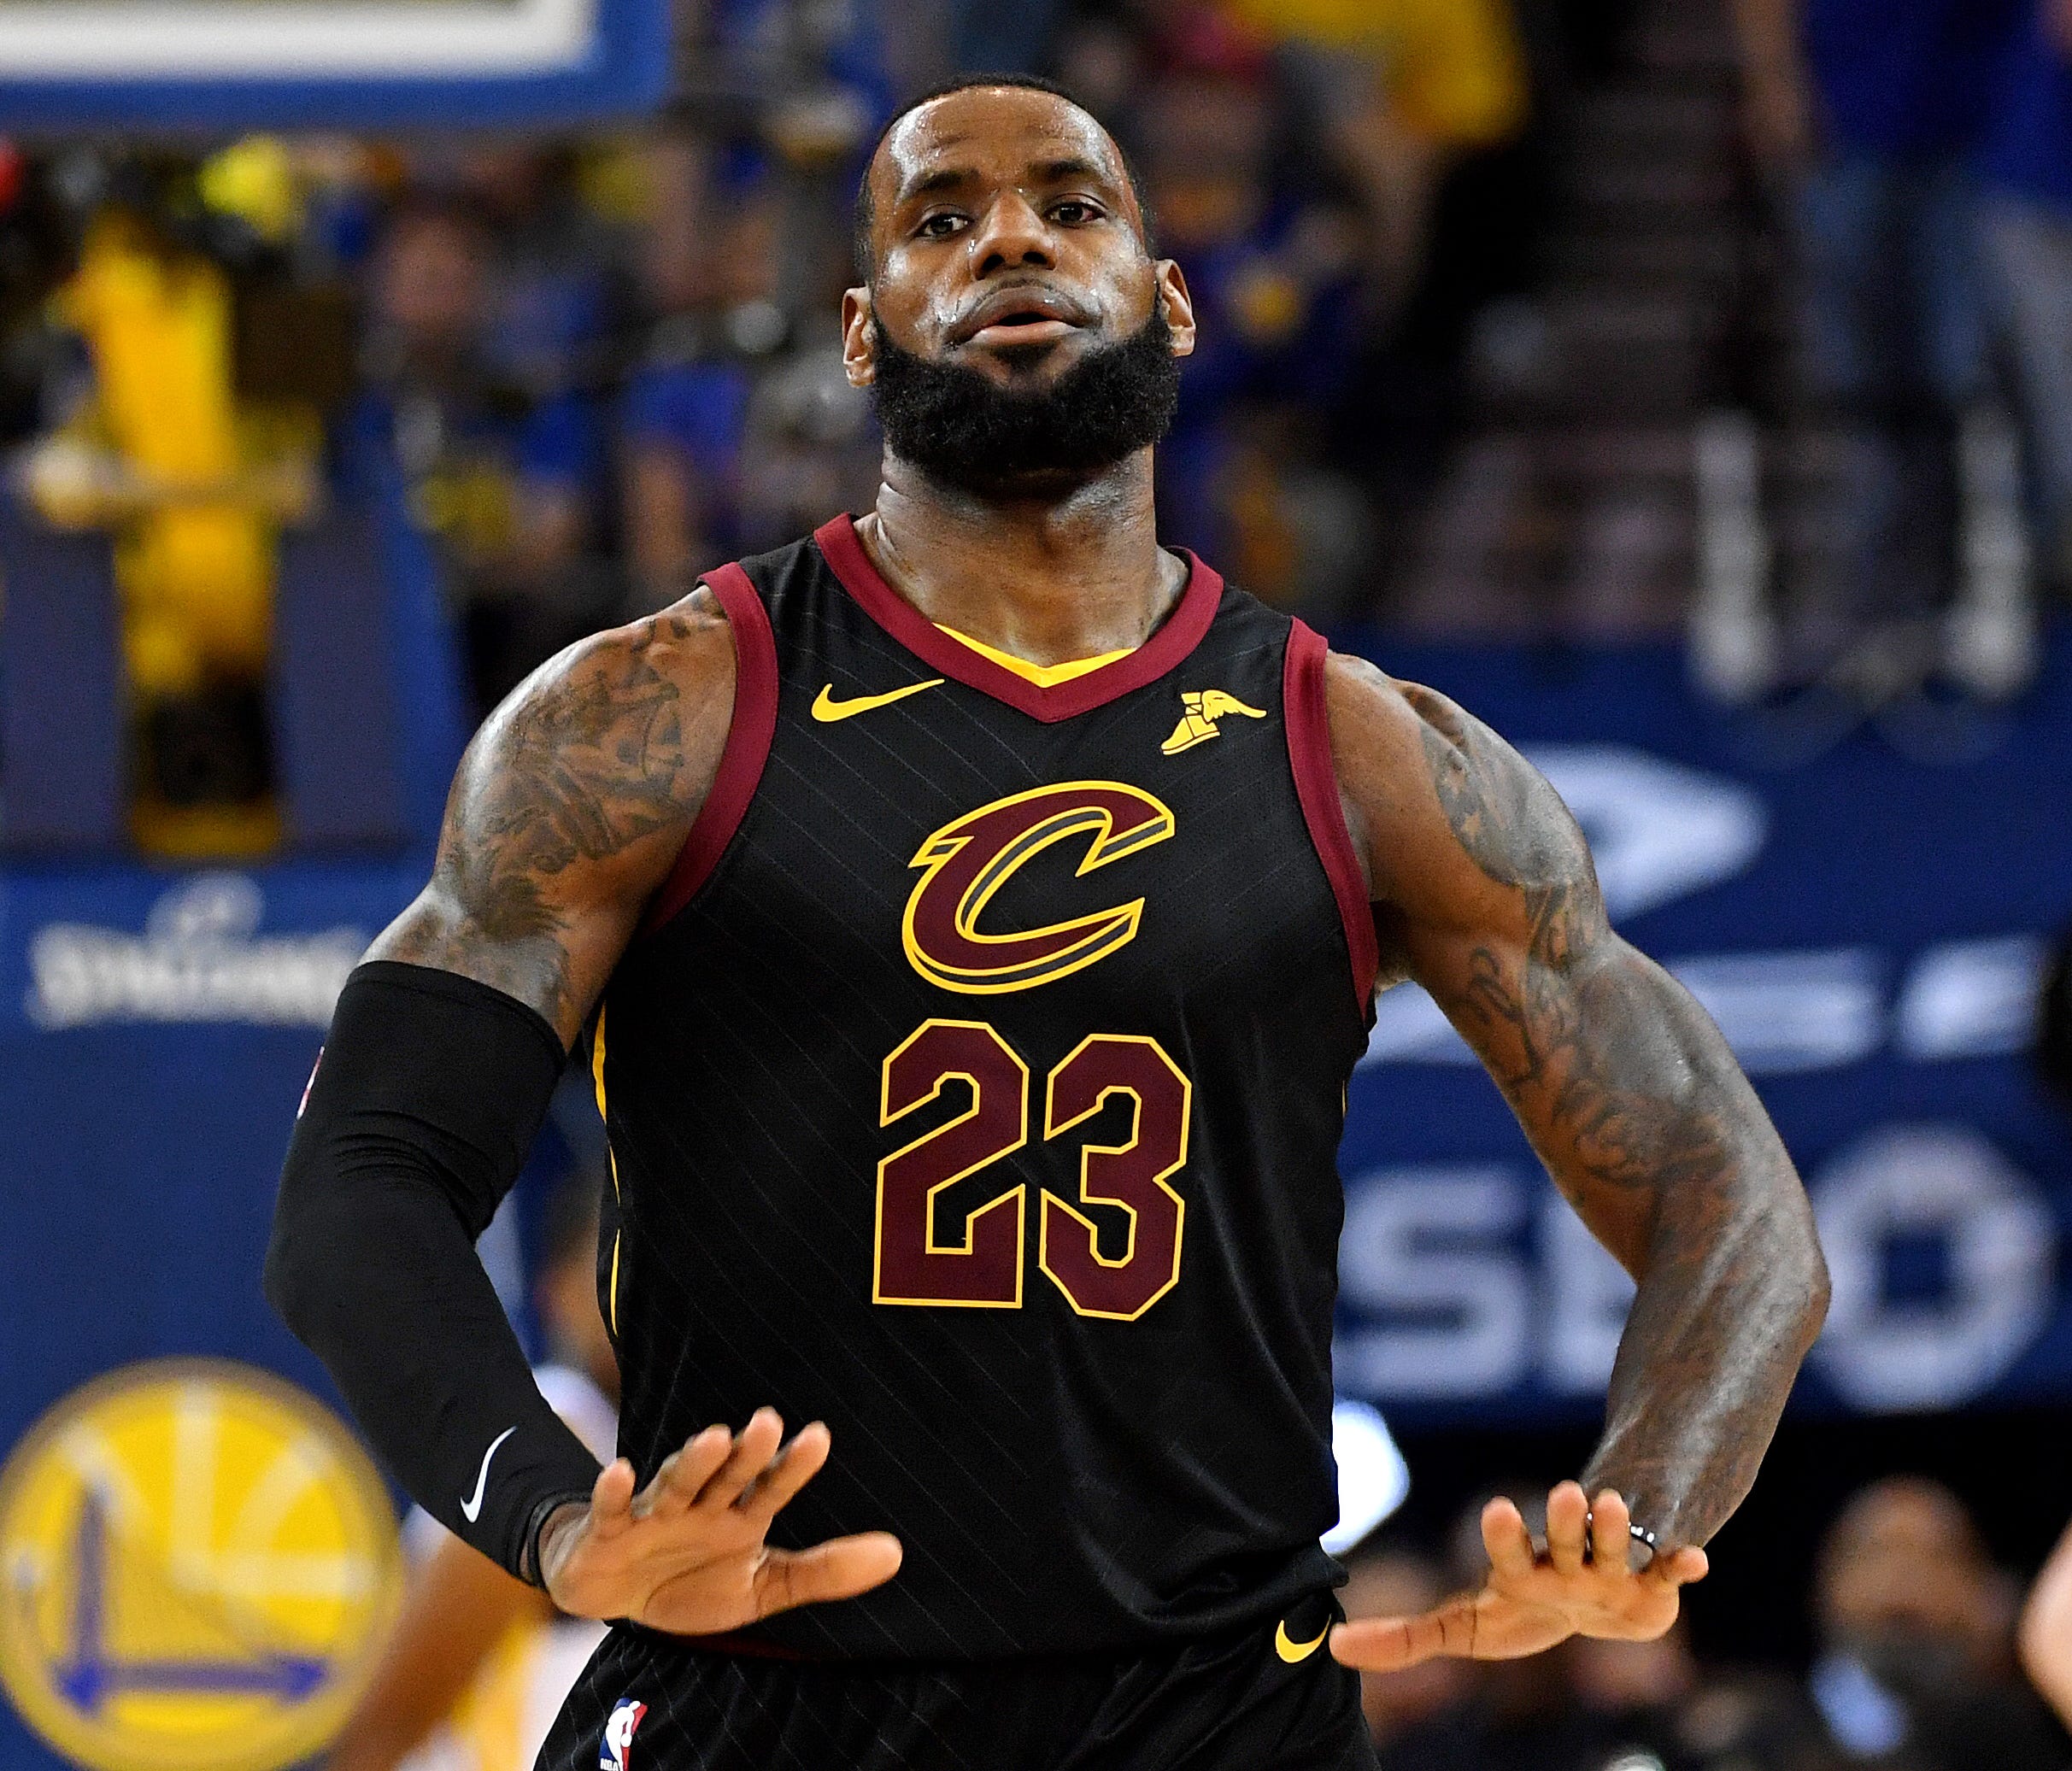 May 31, 2018; Oakland, CA, USA; Cleveland Cavaliers forward LeBron James (23) reacts after a play during the third quarter against the Golden State Warriors in game one of the 2018 NBA Finals at Oracle Arena. Mandatory Credit: Kyle Terada-USA TODAY S